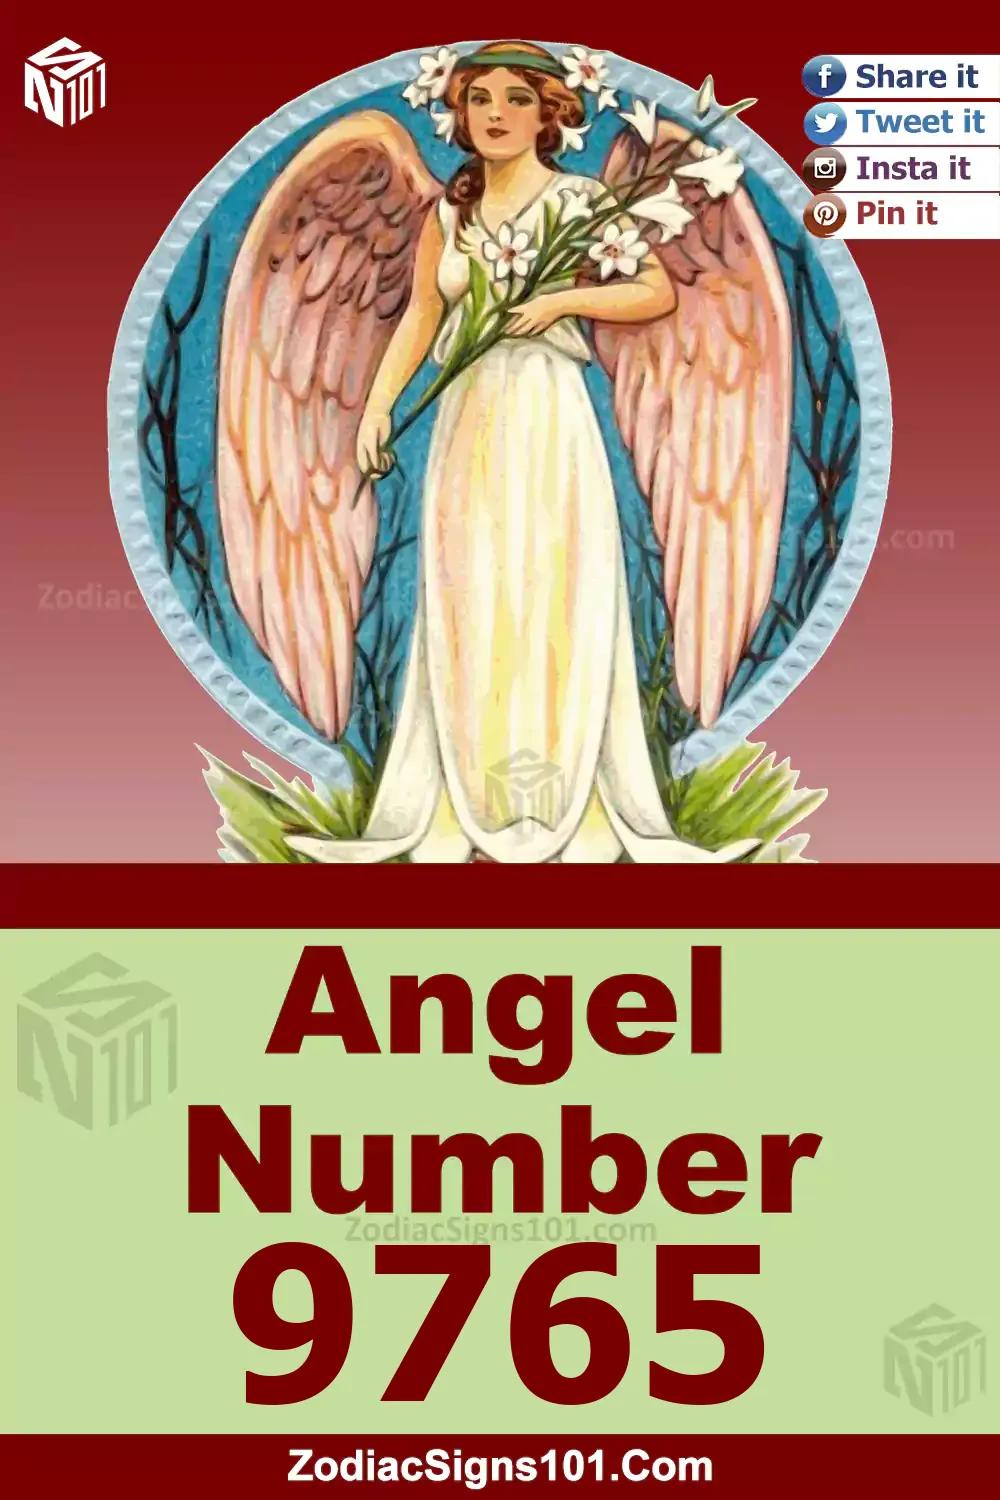 9765 Angel Number Meaning